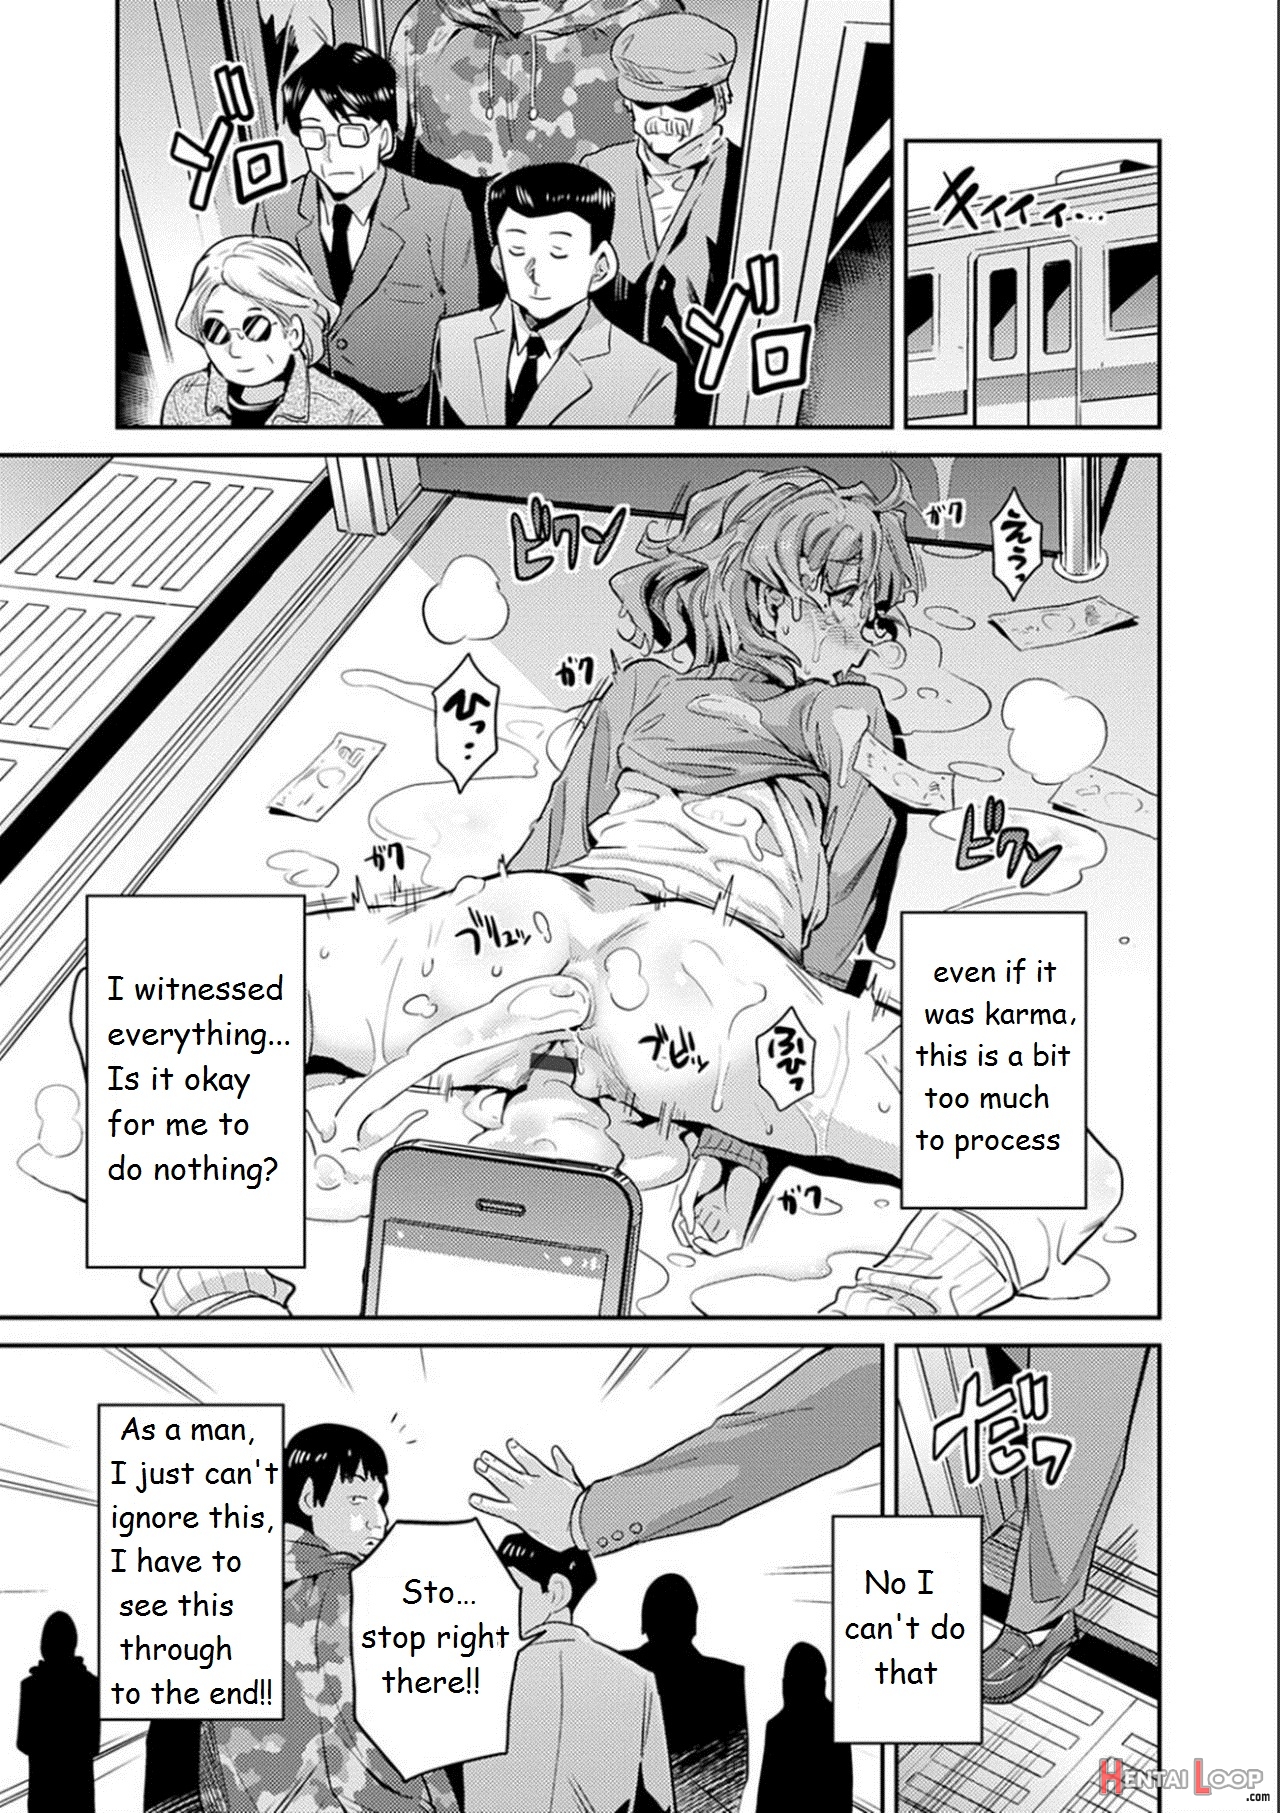 The Girl Who Cried Molester Kyousei Tanetsuke Express - Forced Seeding Express 1st Story page 24